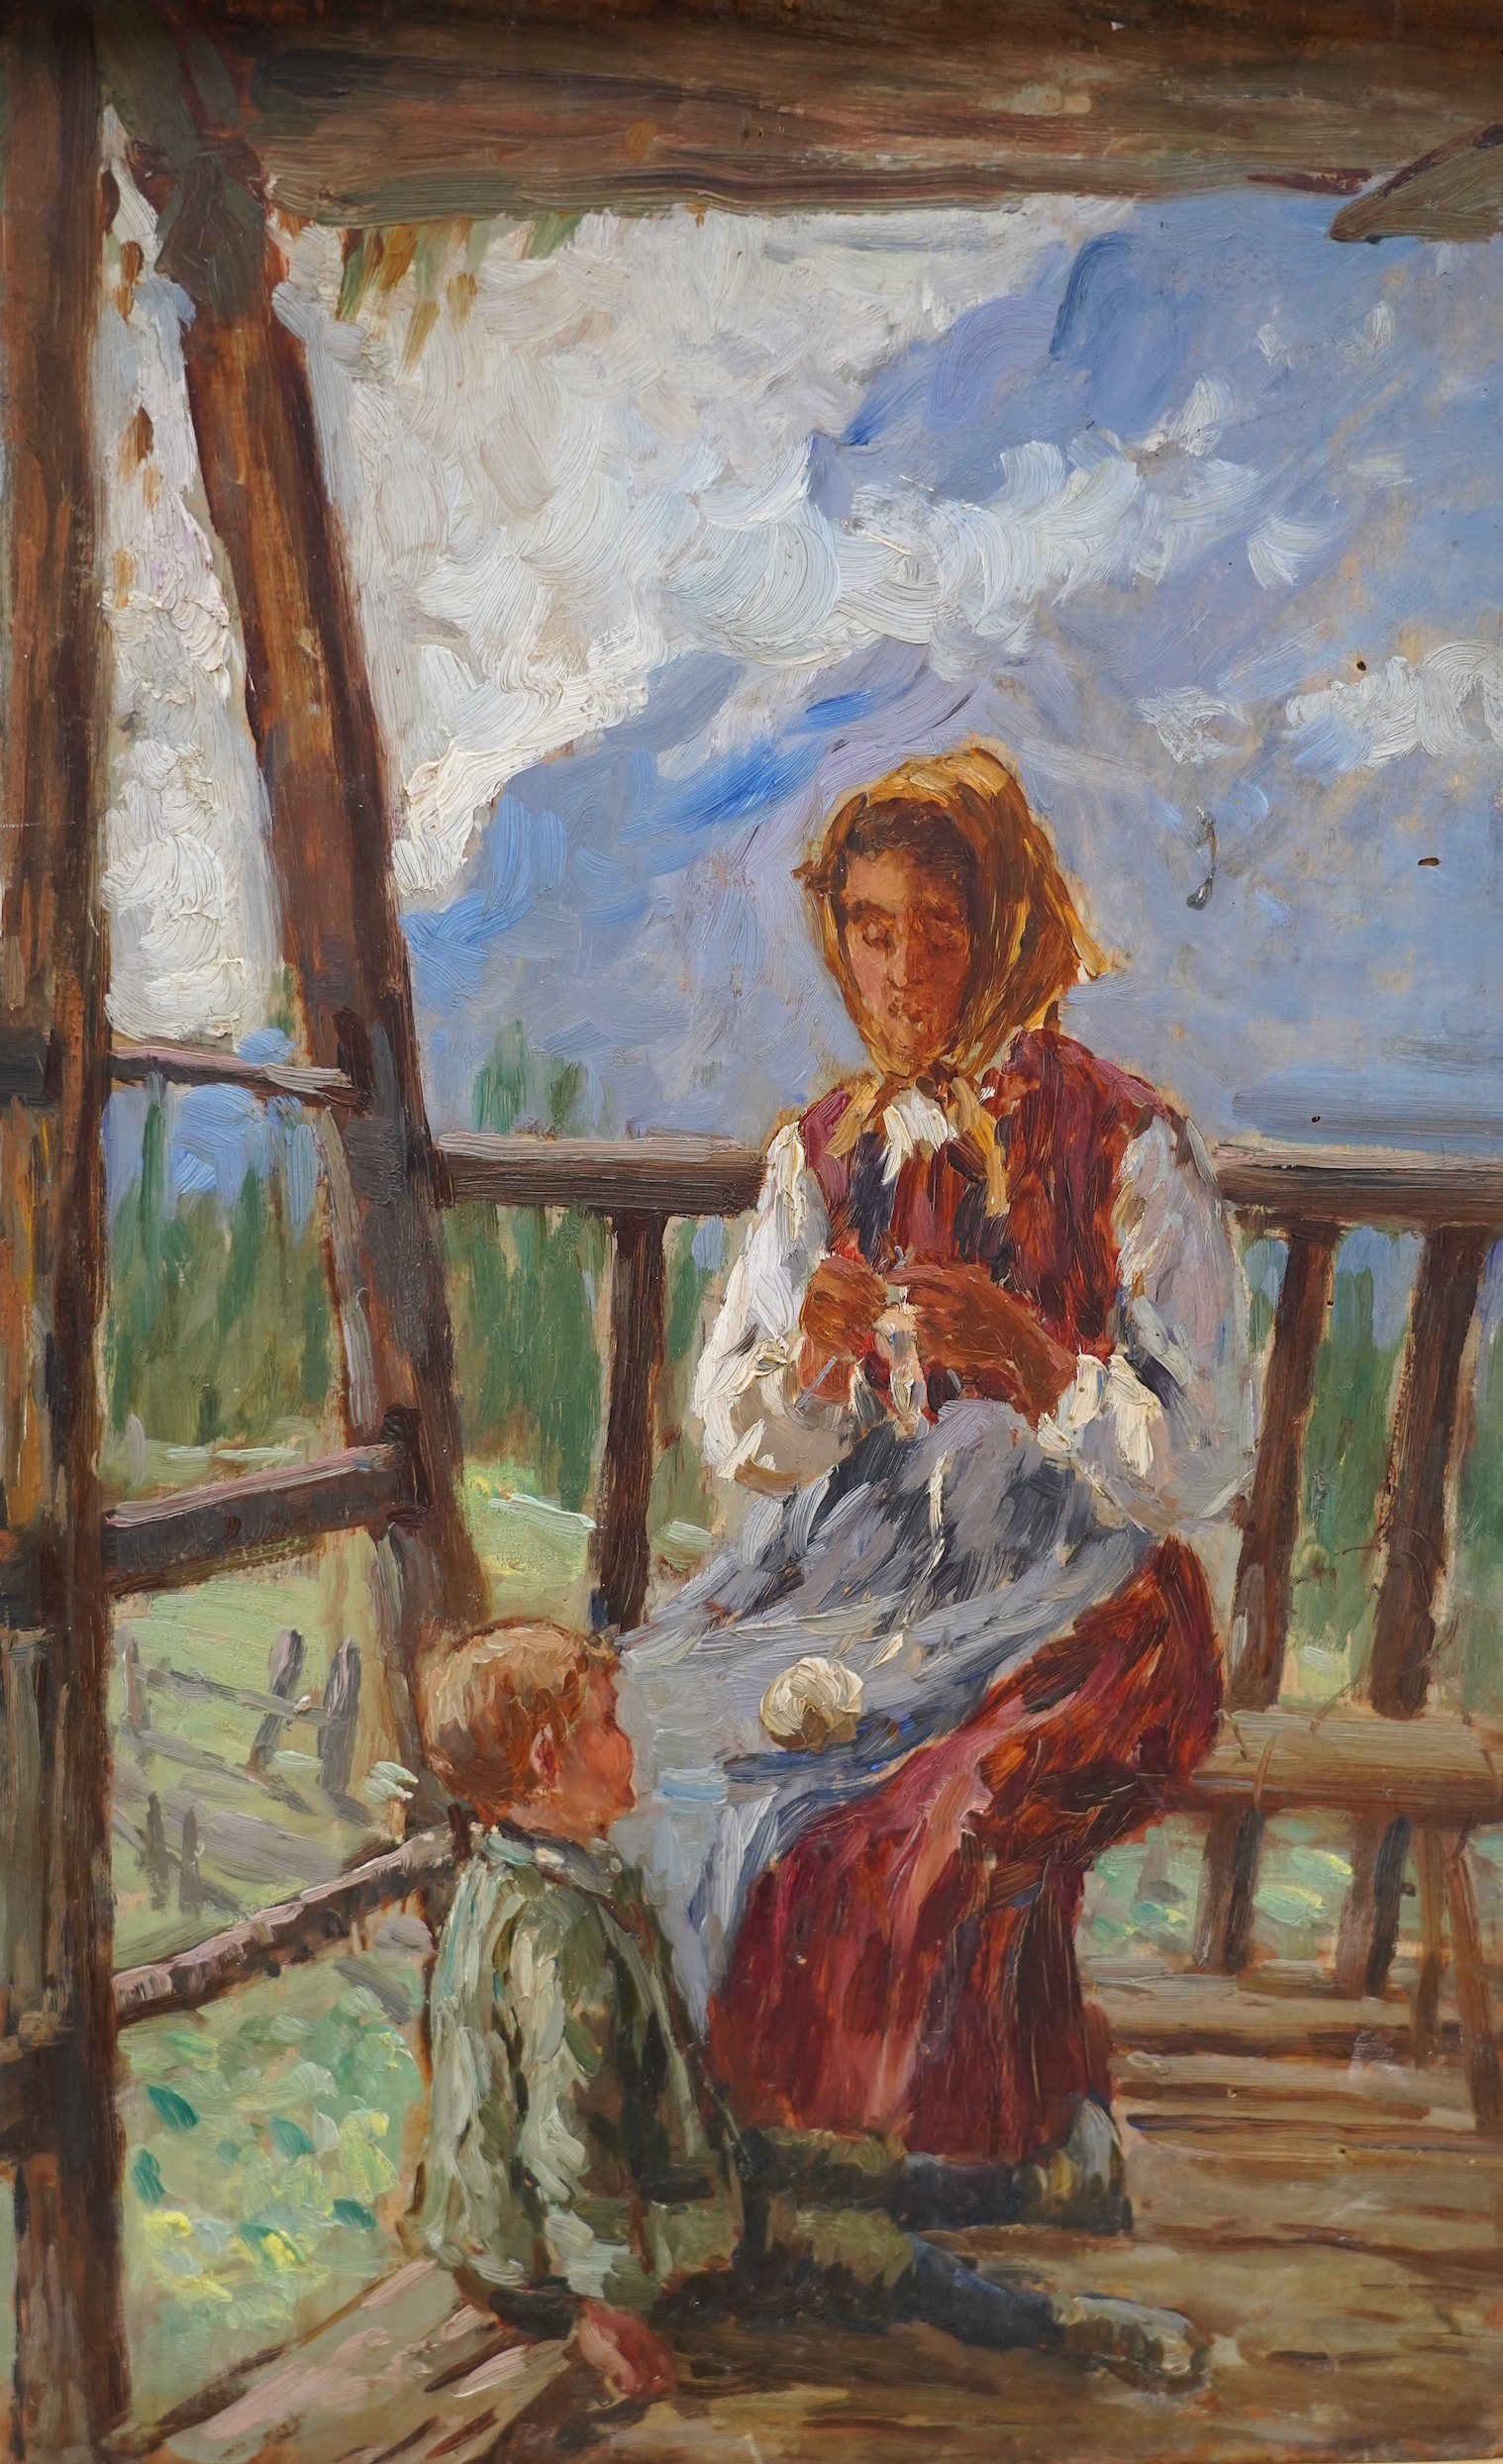 20th century Swiss School, oil on board, Study of a mother and child before mountains, indistinctly inscribed on reverse, 42 x 27cm, unframed. Condition - fair to good